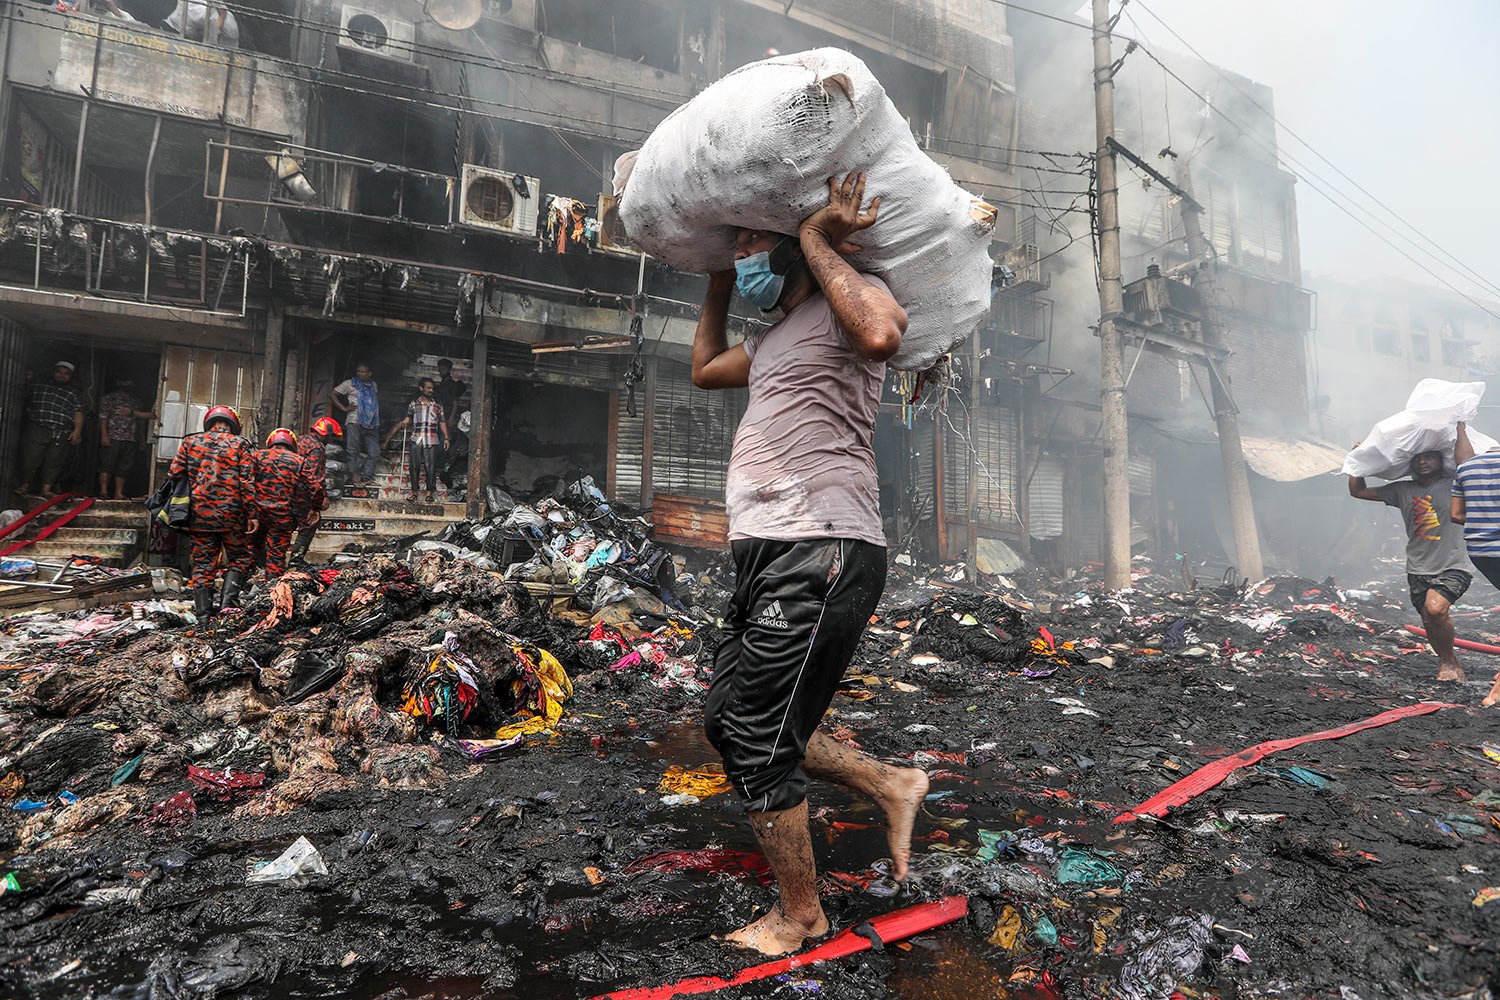  Shopkeepers salvage their goods from nearby shops as a fire rages at a popular market for cheaper clothes in Bangladesh's capital Dhaka, Bangladesh, Tuesday, April 4, 2023. (AP Photo/Mahmud Hossain Opu) 